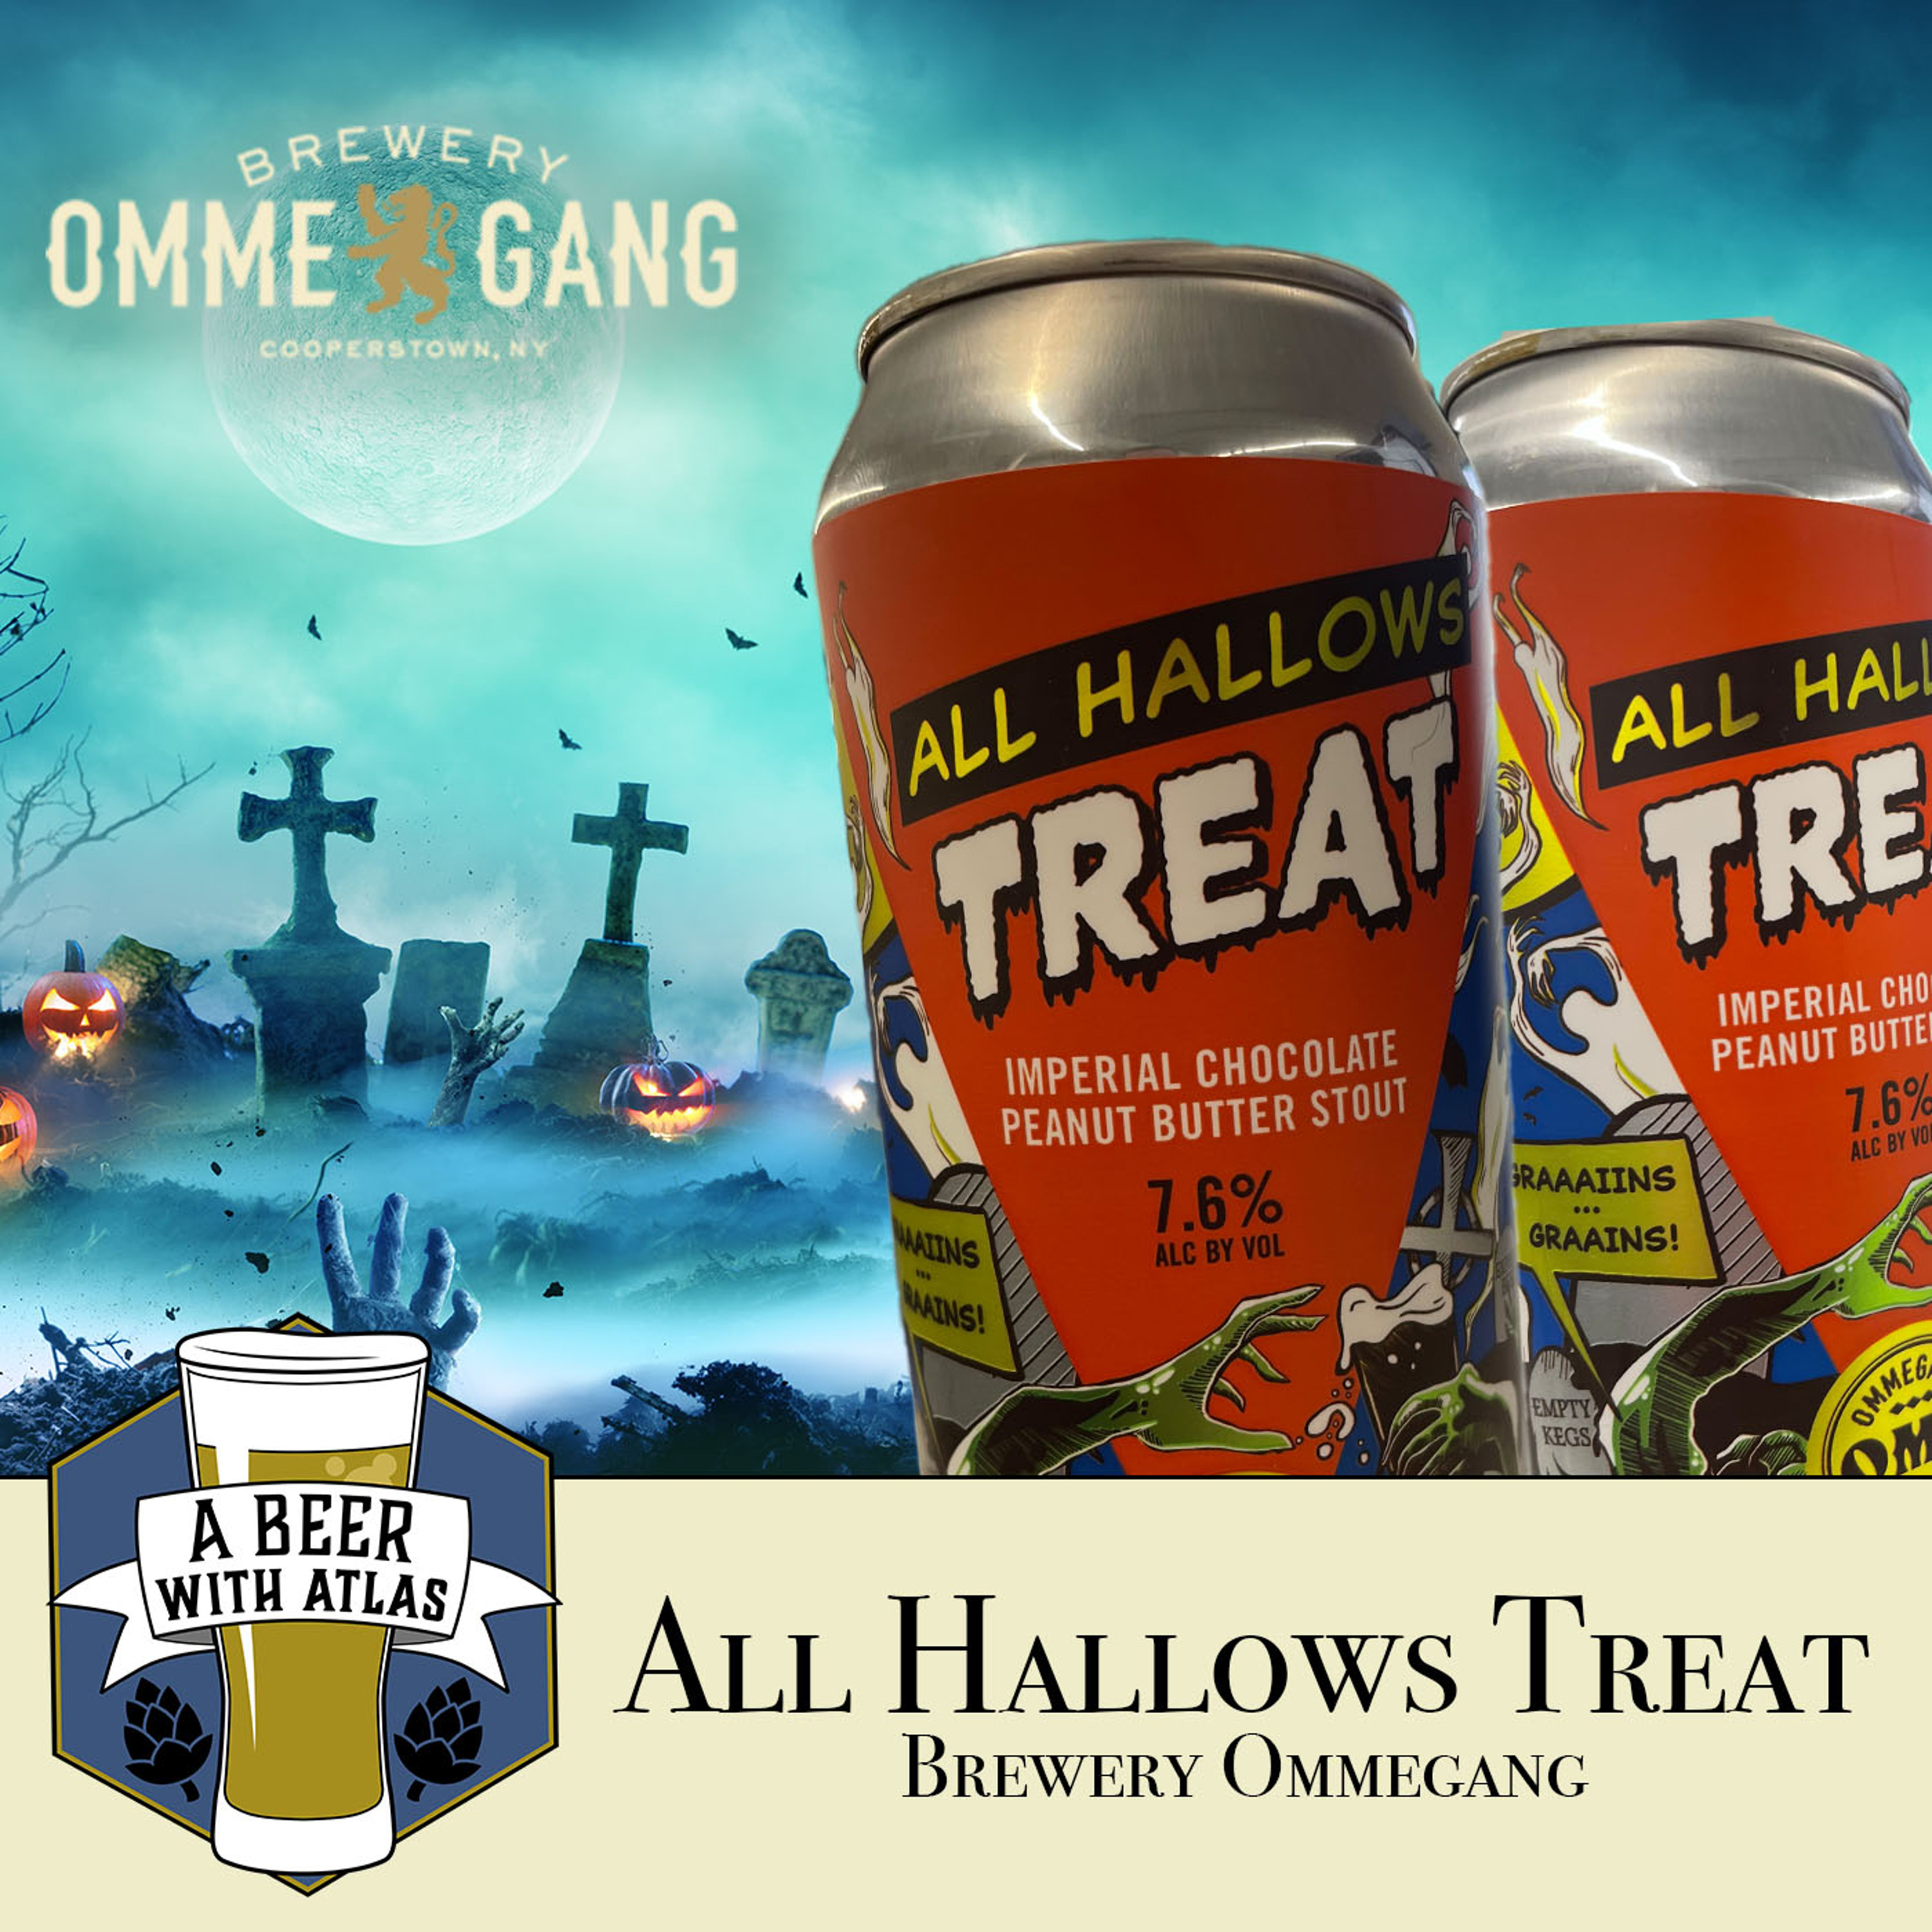 All Hallows Treat | Chocolate Peanut Butter Stout by Brewery Ommegang - A Beer with Atlas 218